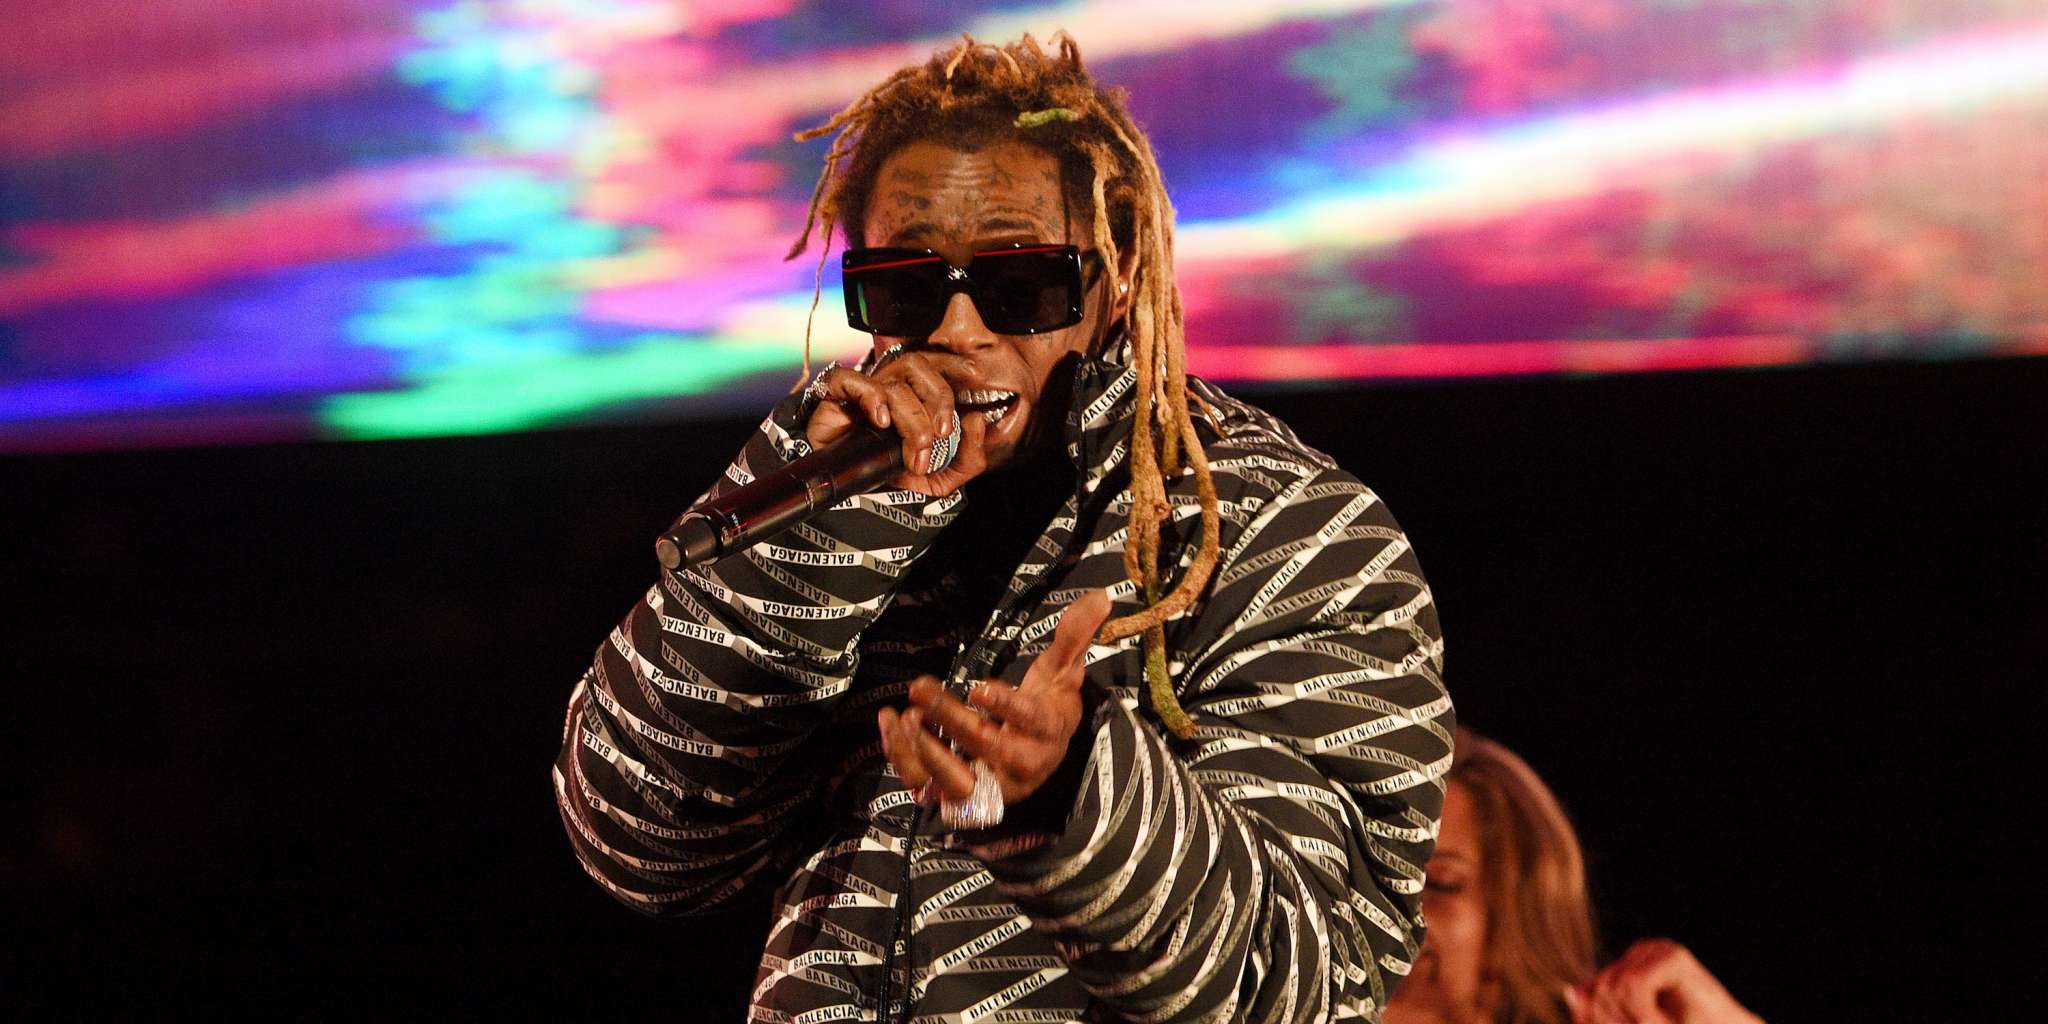 lil-wayne-is-in-the-spotlight-following-former-security-guards-accusations